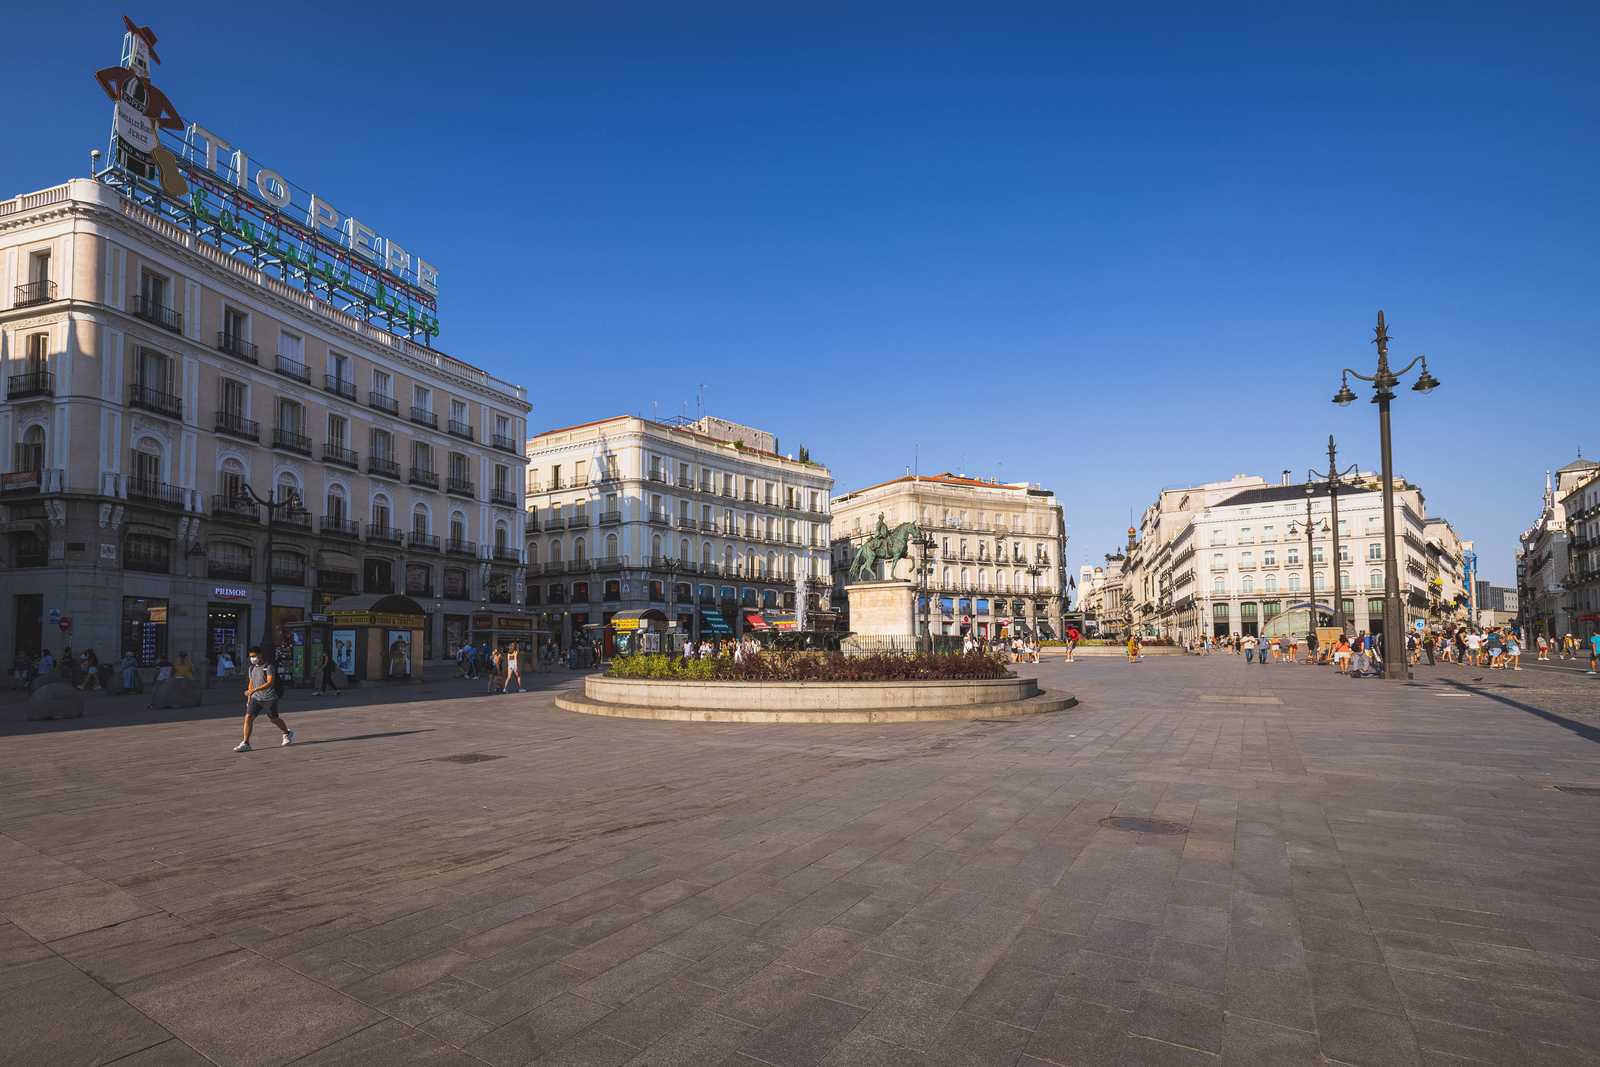 Puerta del Sol, one of the busiest open spaces in Madrid and the center of the city